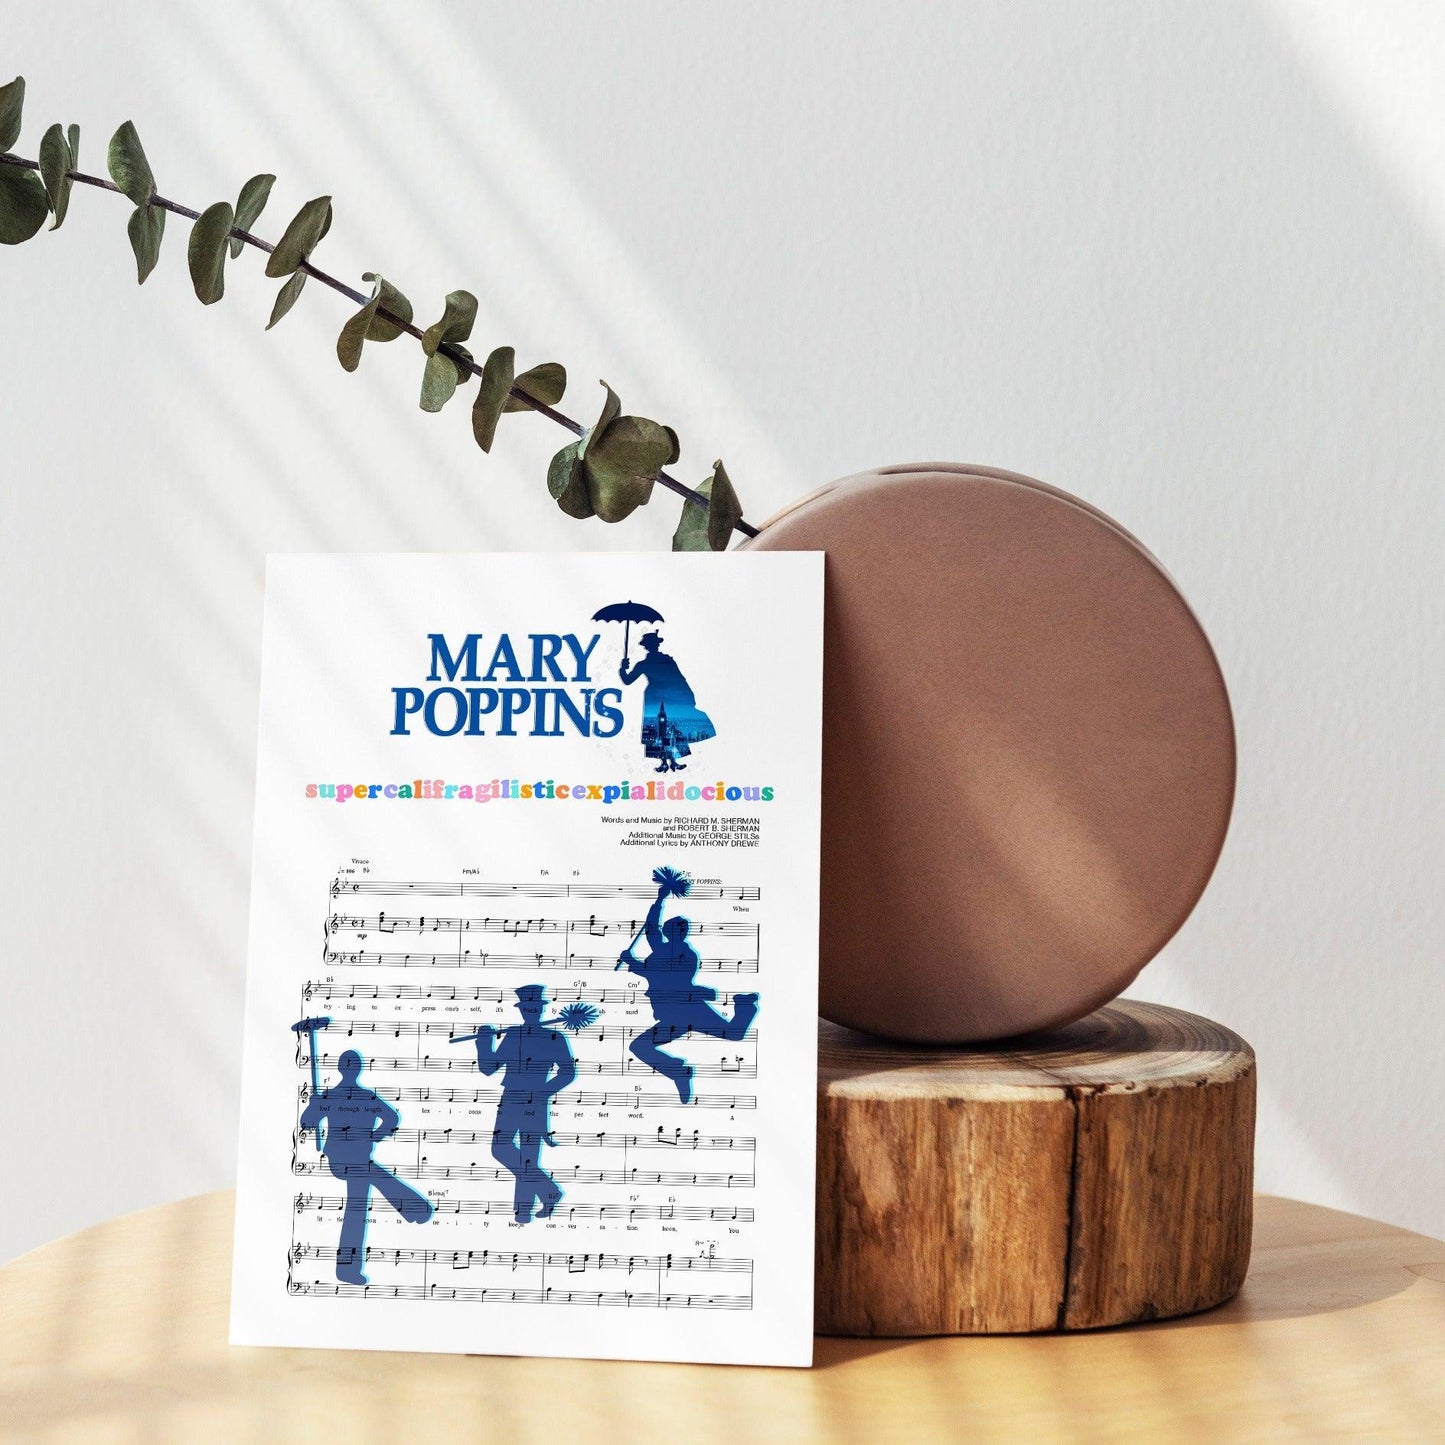 This poster is the perfect addition to any music lover's home. Featuring the iconic Mary Poppins song, "Supercalifragilisticexpialidocious", this poster is sure to bring a smile to your face every time you see it. Printed on high-quality paper, this poster is perfect for framing and makes a great gift for any Mary Poppins fan.